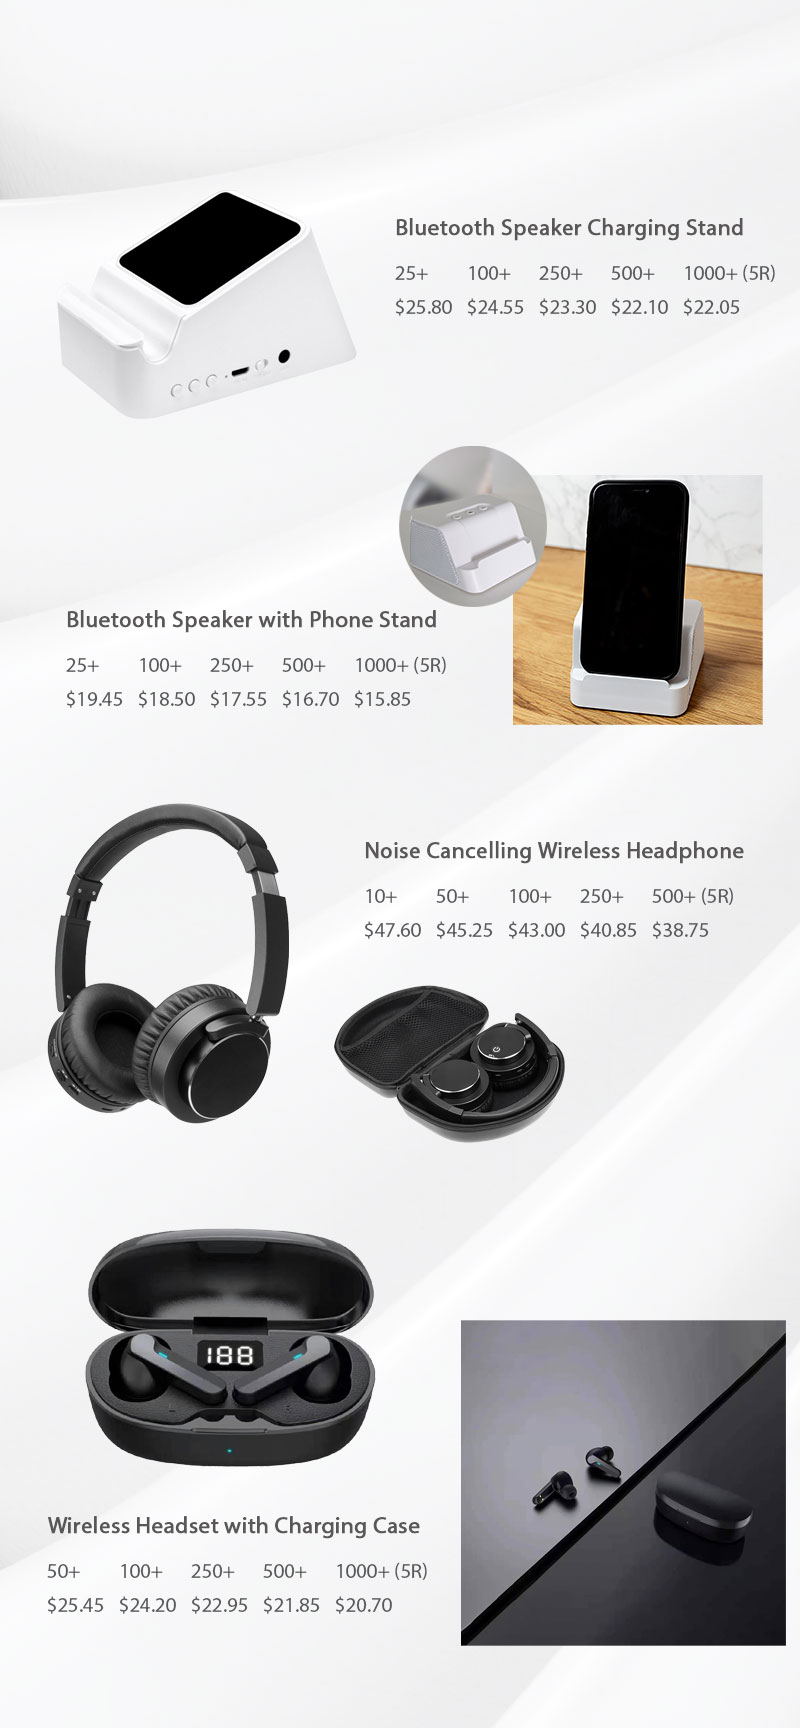 Lungsal's Bluetooth Speakers and Headphones